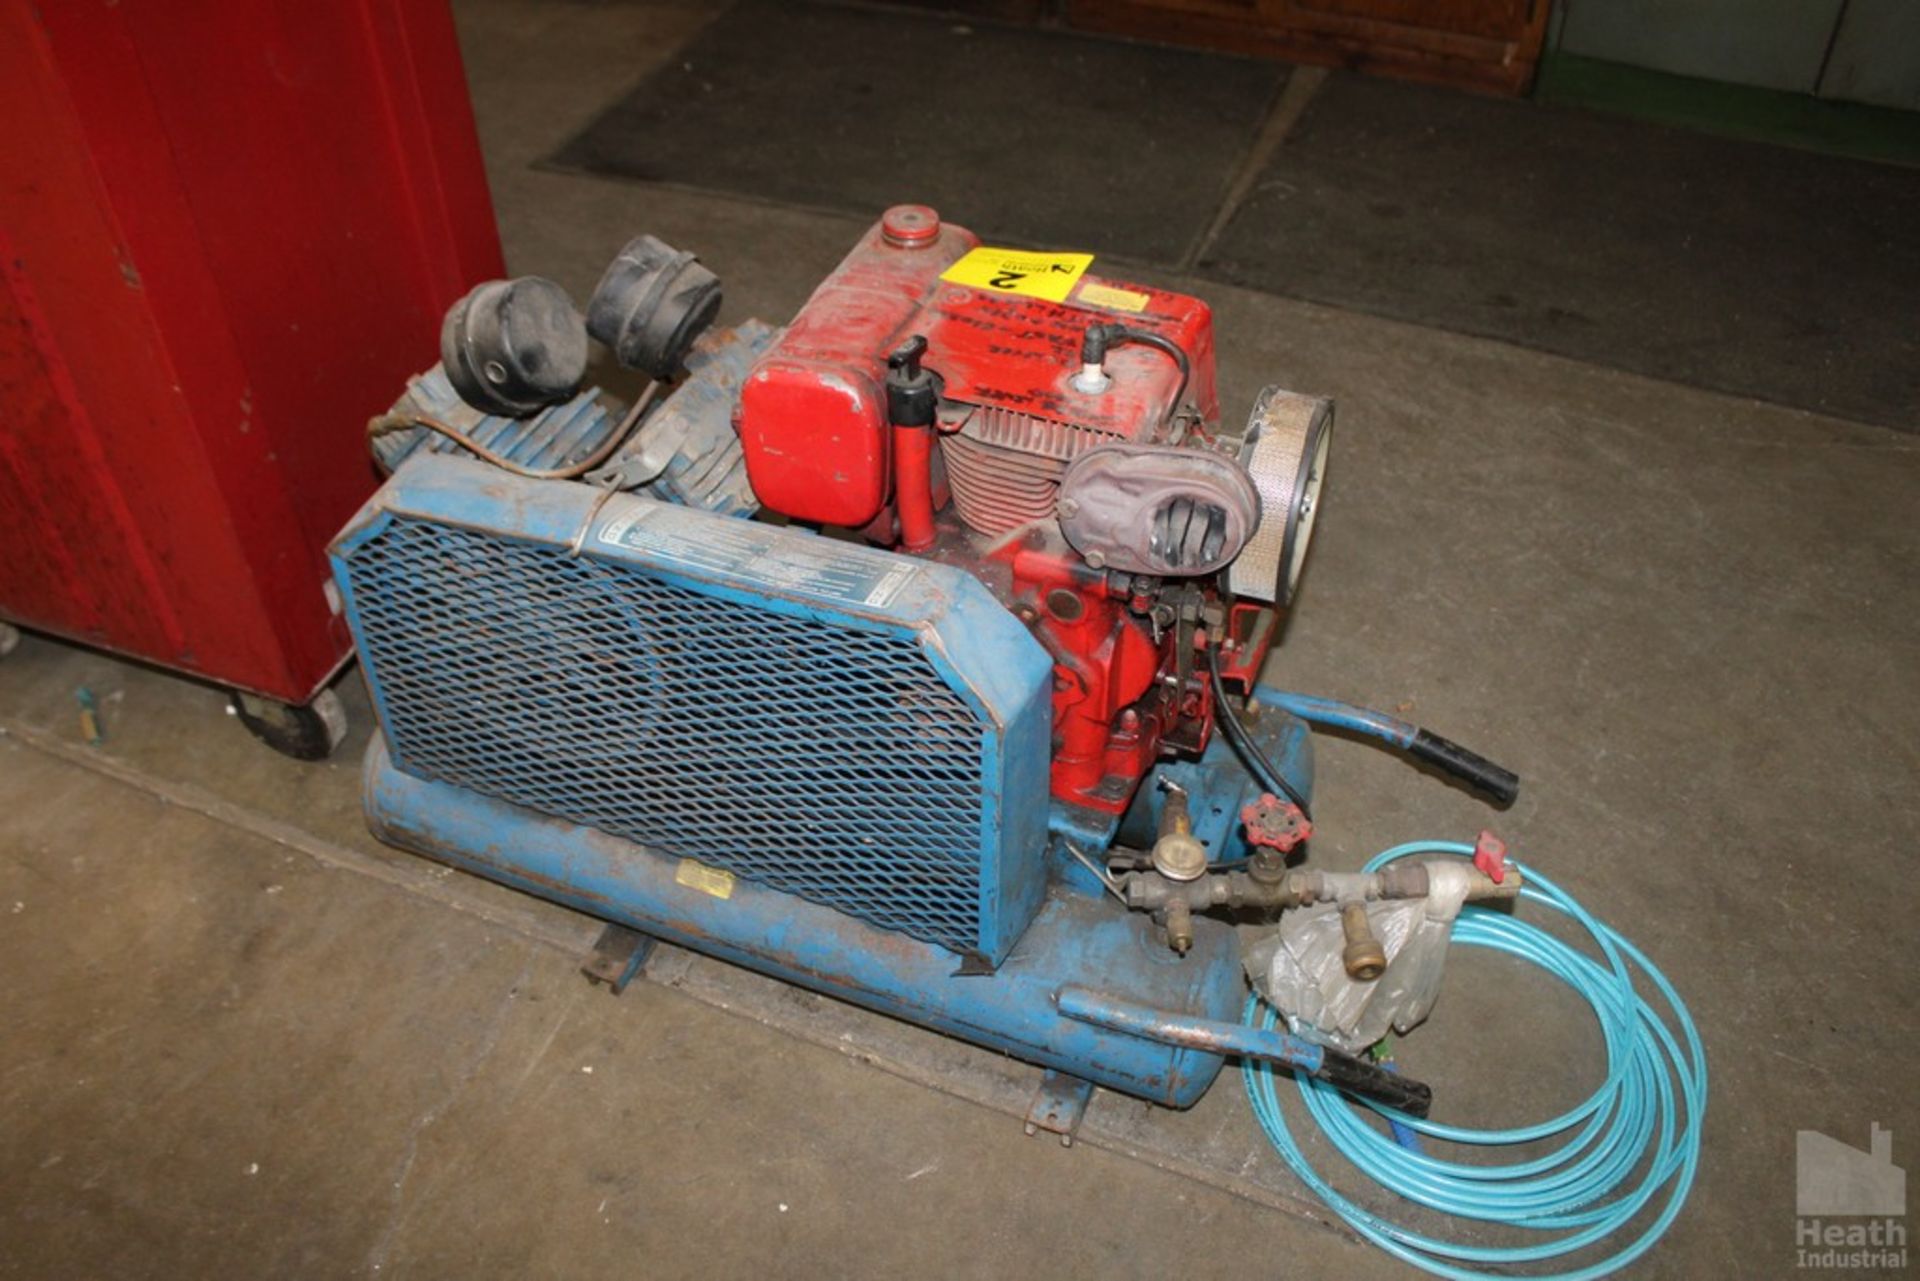 AIR SWEEP DUAL TANK PORTABLE GAS POWERED AIR COMPRESSOR WITH KOHLER MAGNUM 8 ENGINE - Image 2 of 2